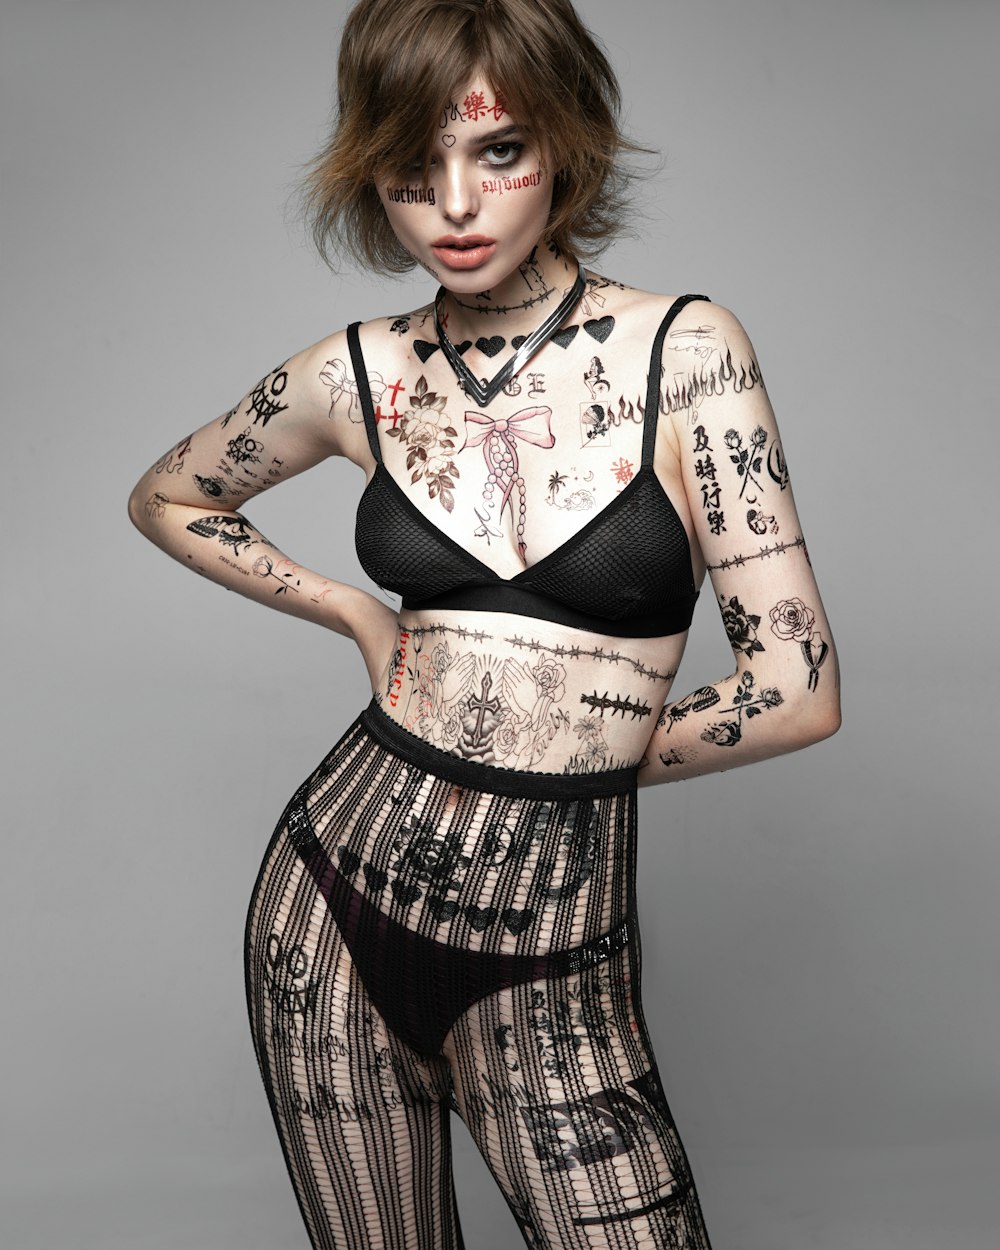 a woman with tattoos on her body posing for a picture